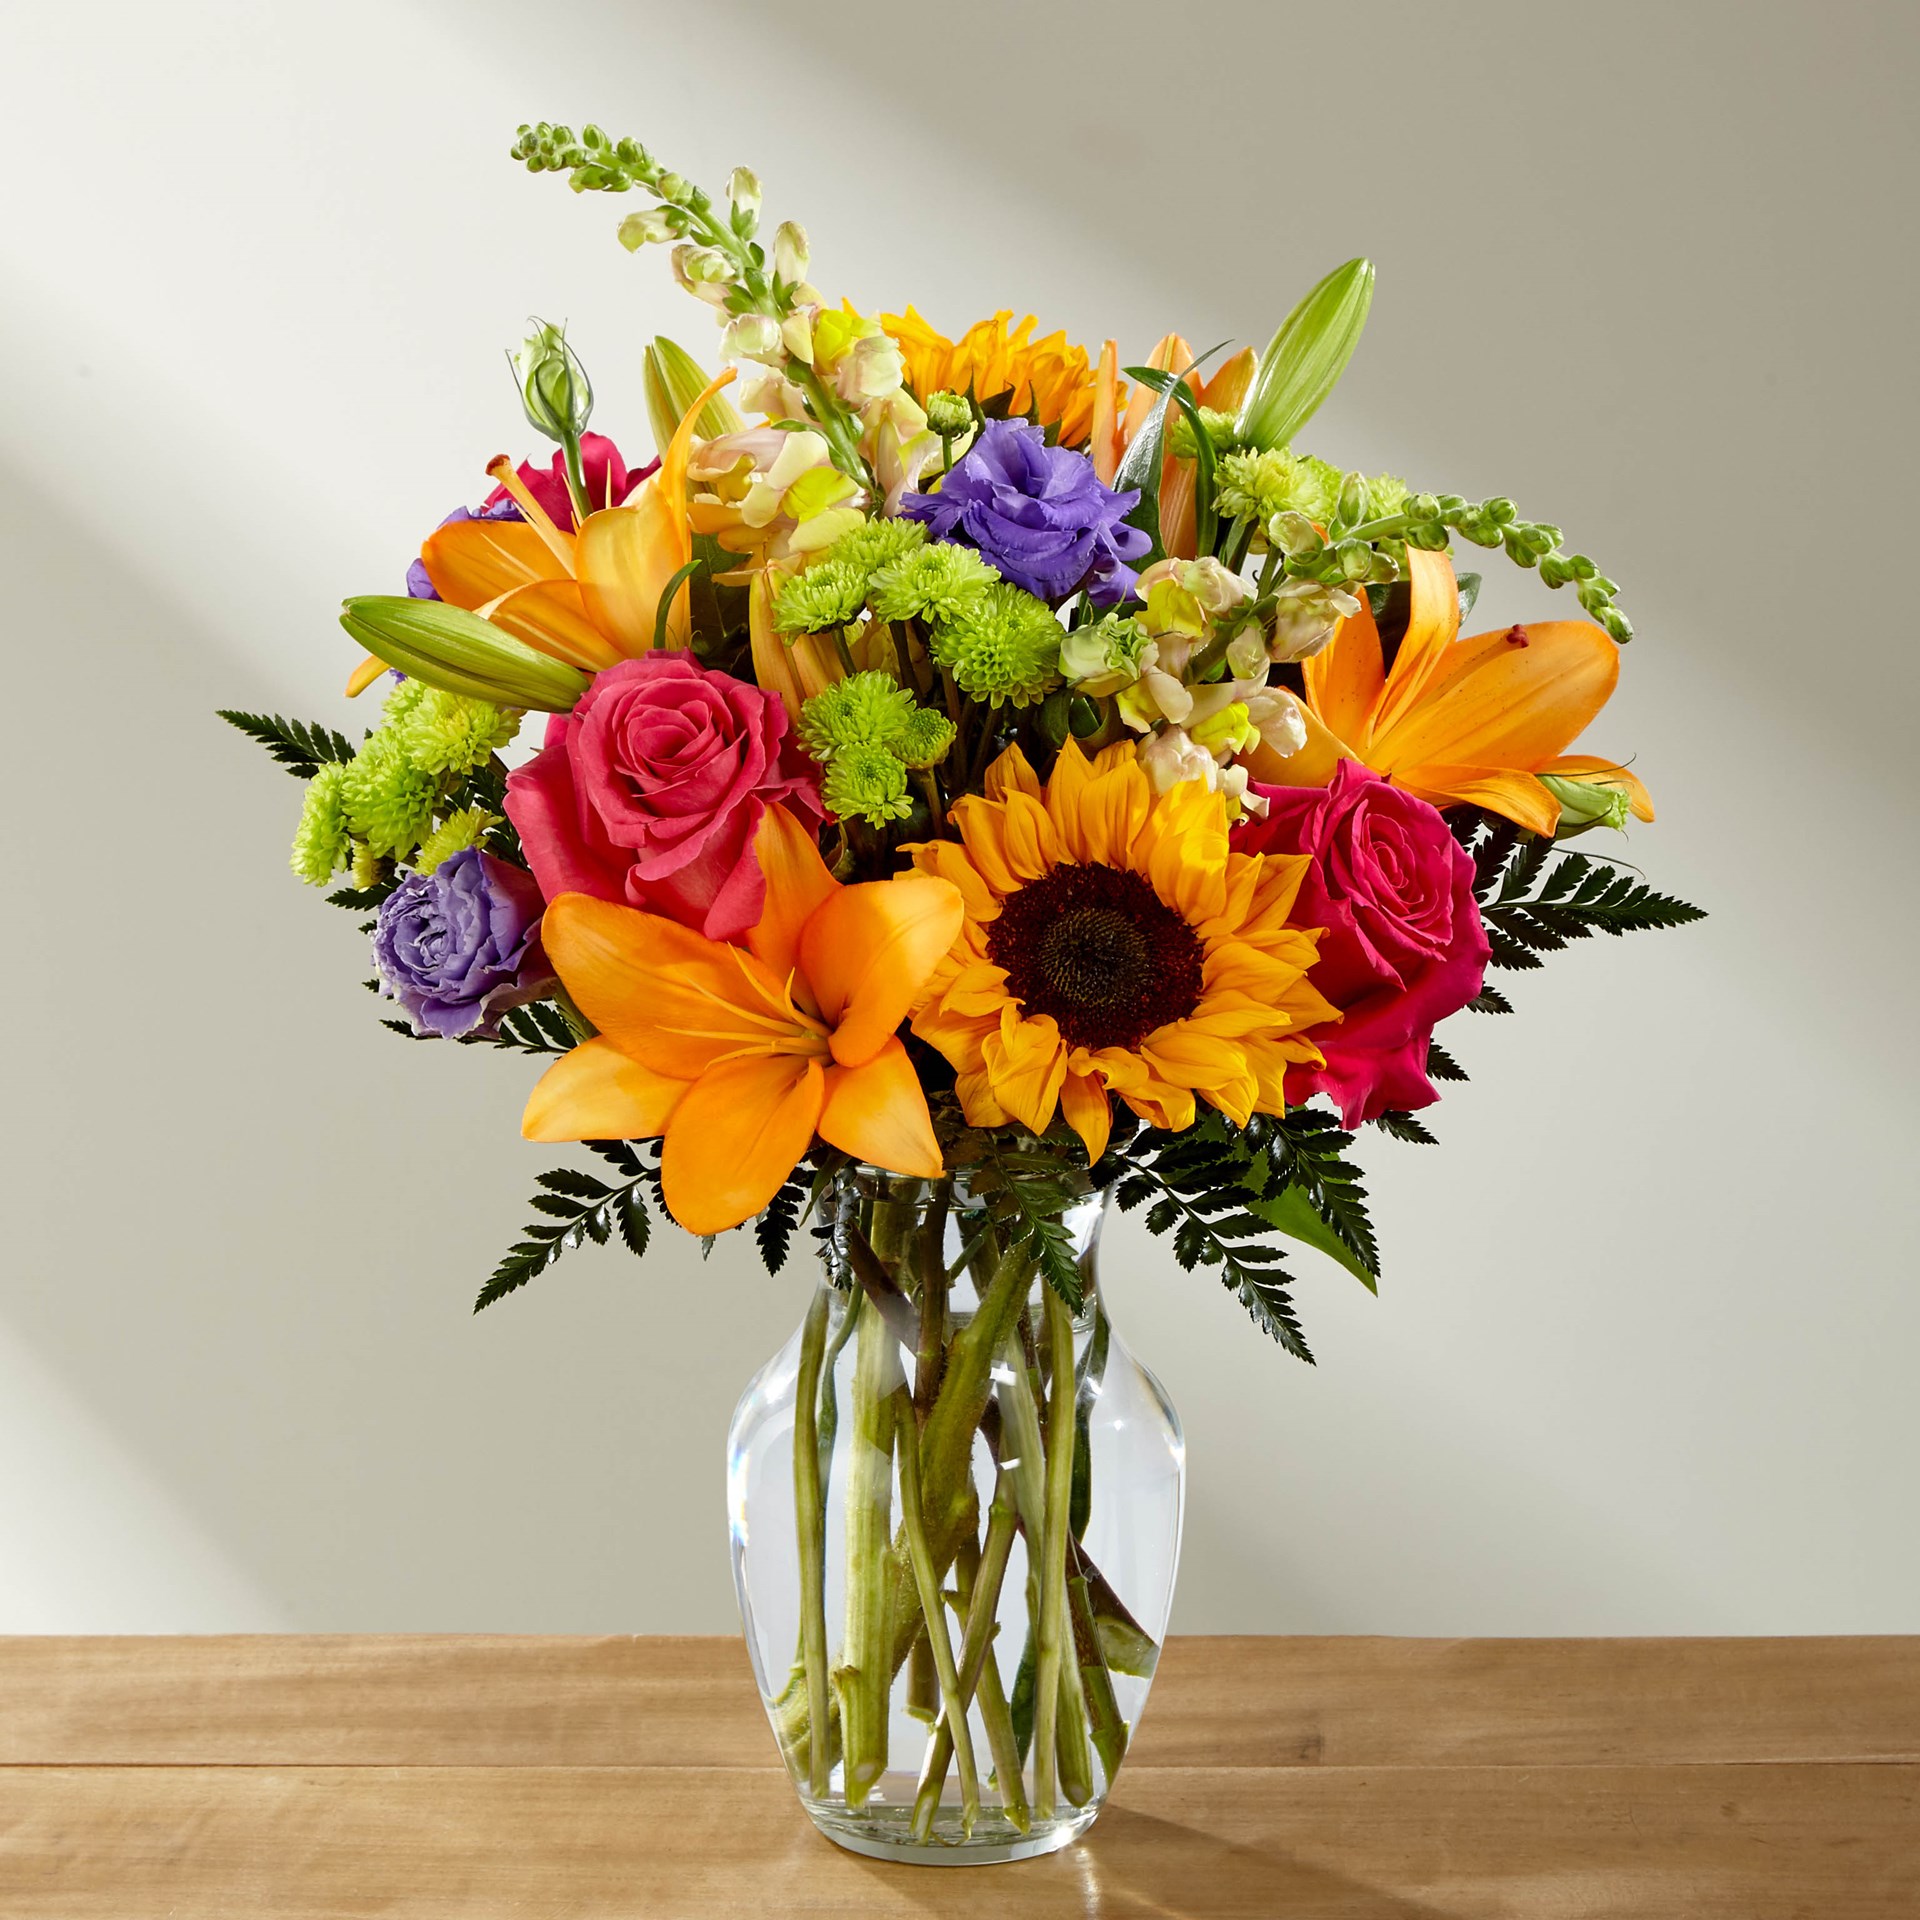 product image for The FTD Best Day Bouquet